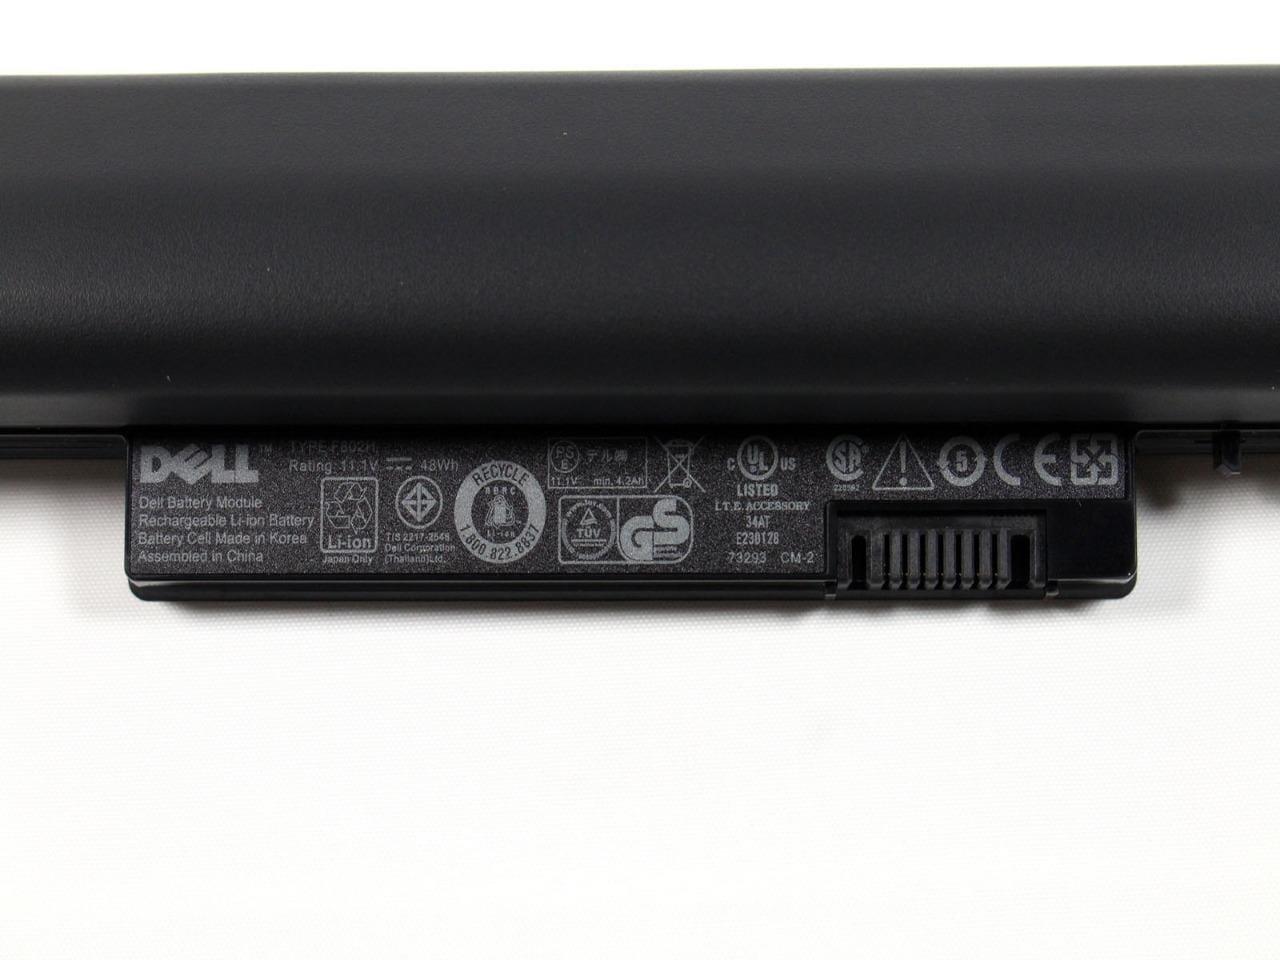 Dell Original 6-cell Battery for Inspiron Mini 12 (1210) PP40S 48WH